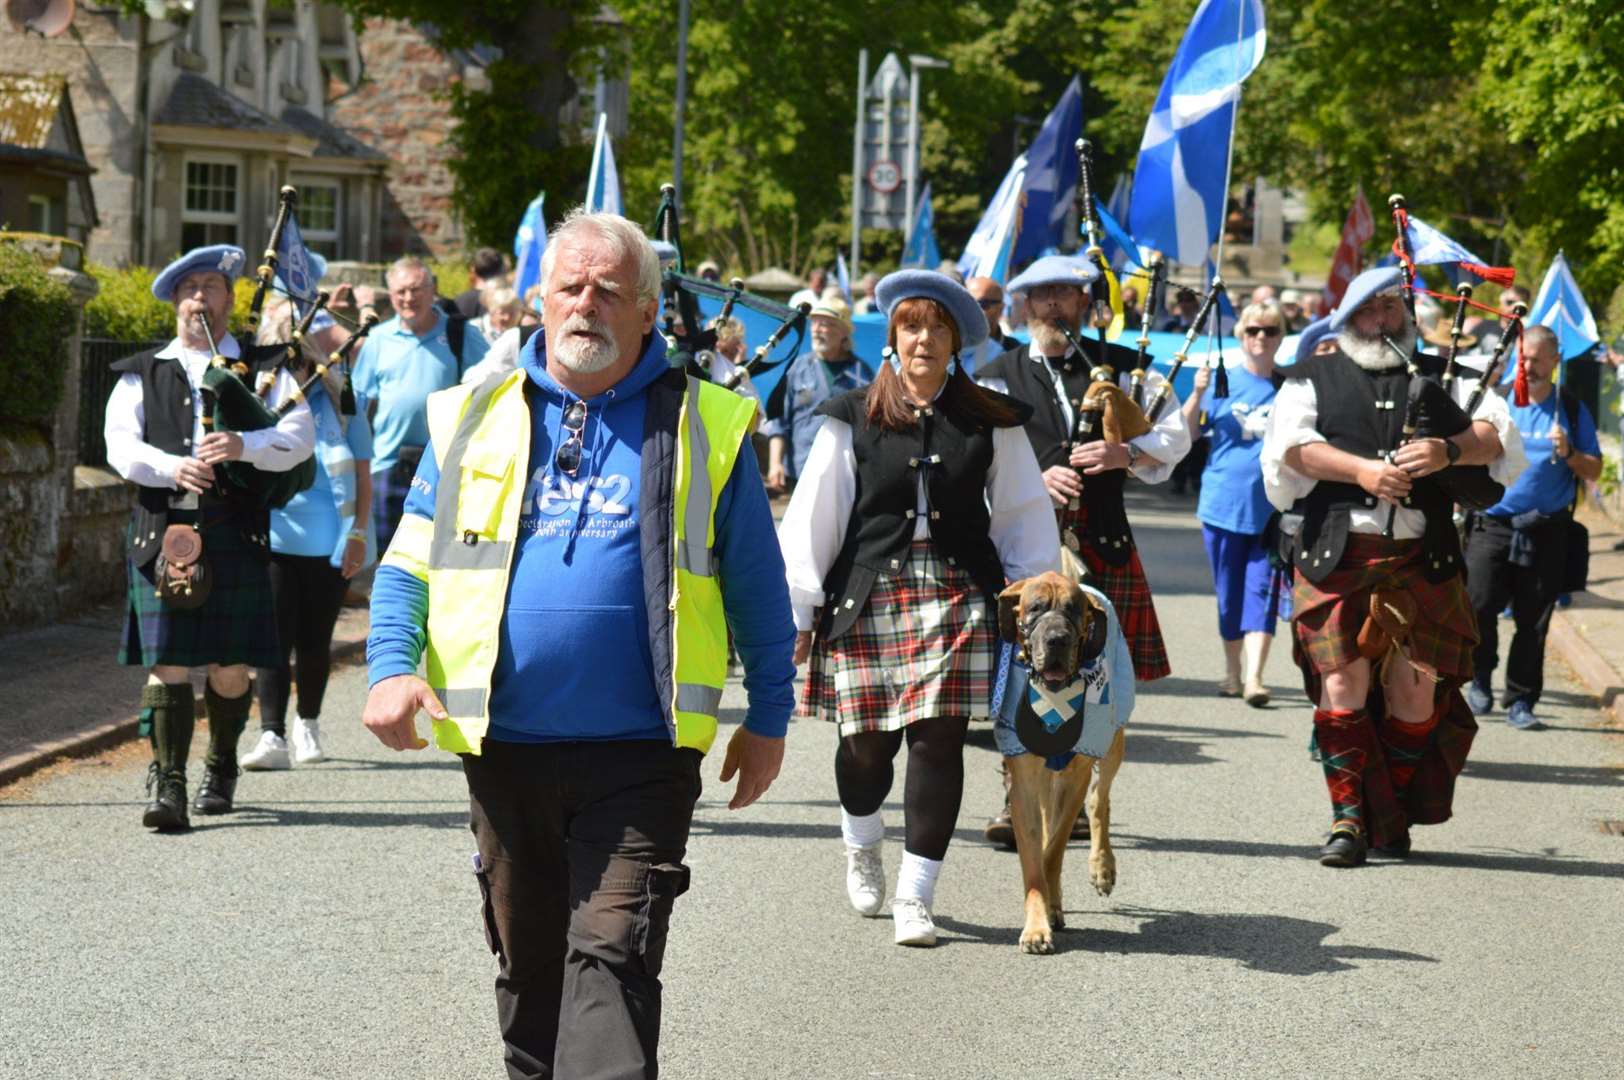 The Manniefest parade in Golspie was part of the three-day festival